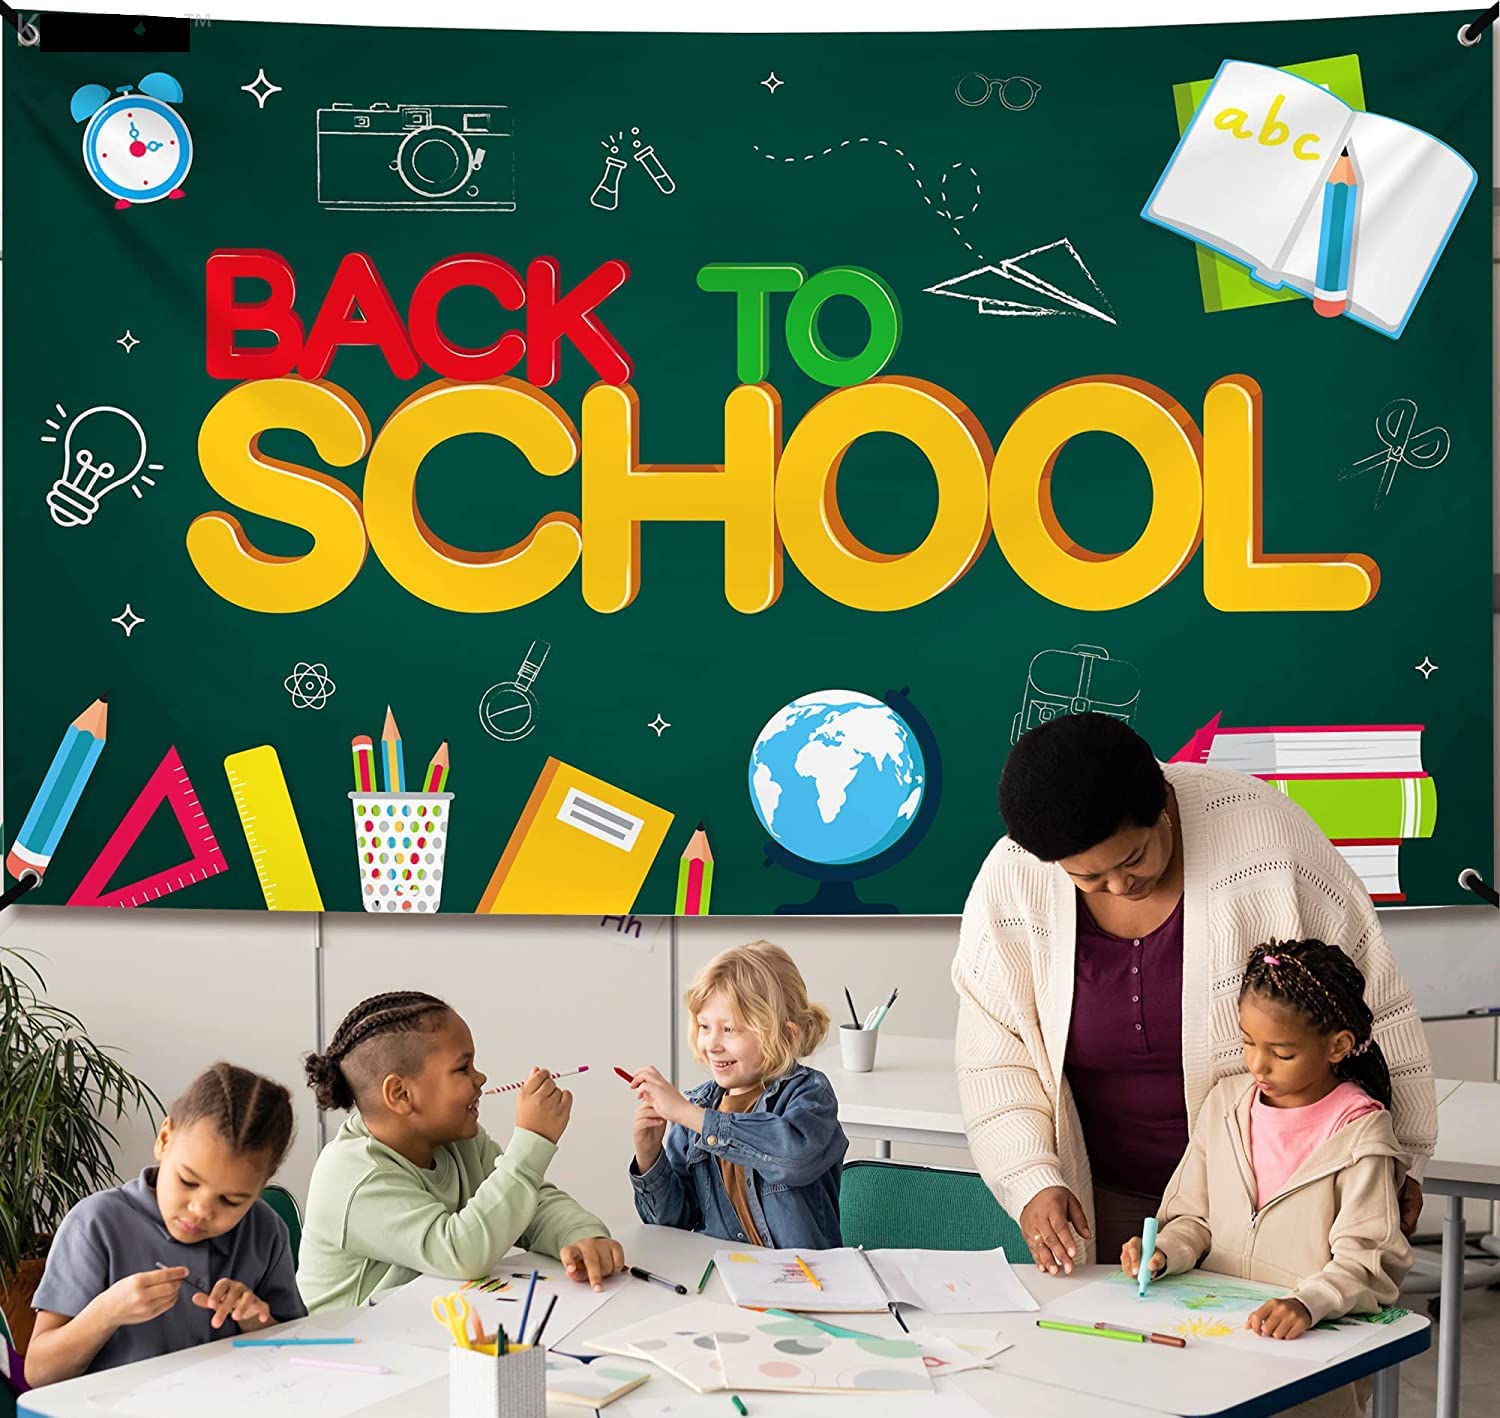 Poster wall banner with the phrase Back to School 180 × 110 cm- Multi Color